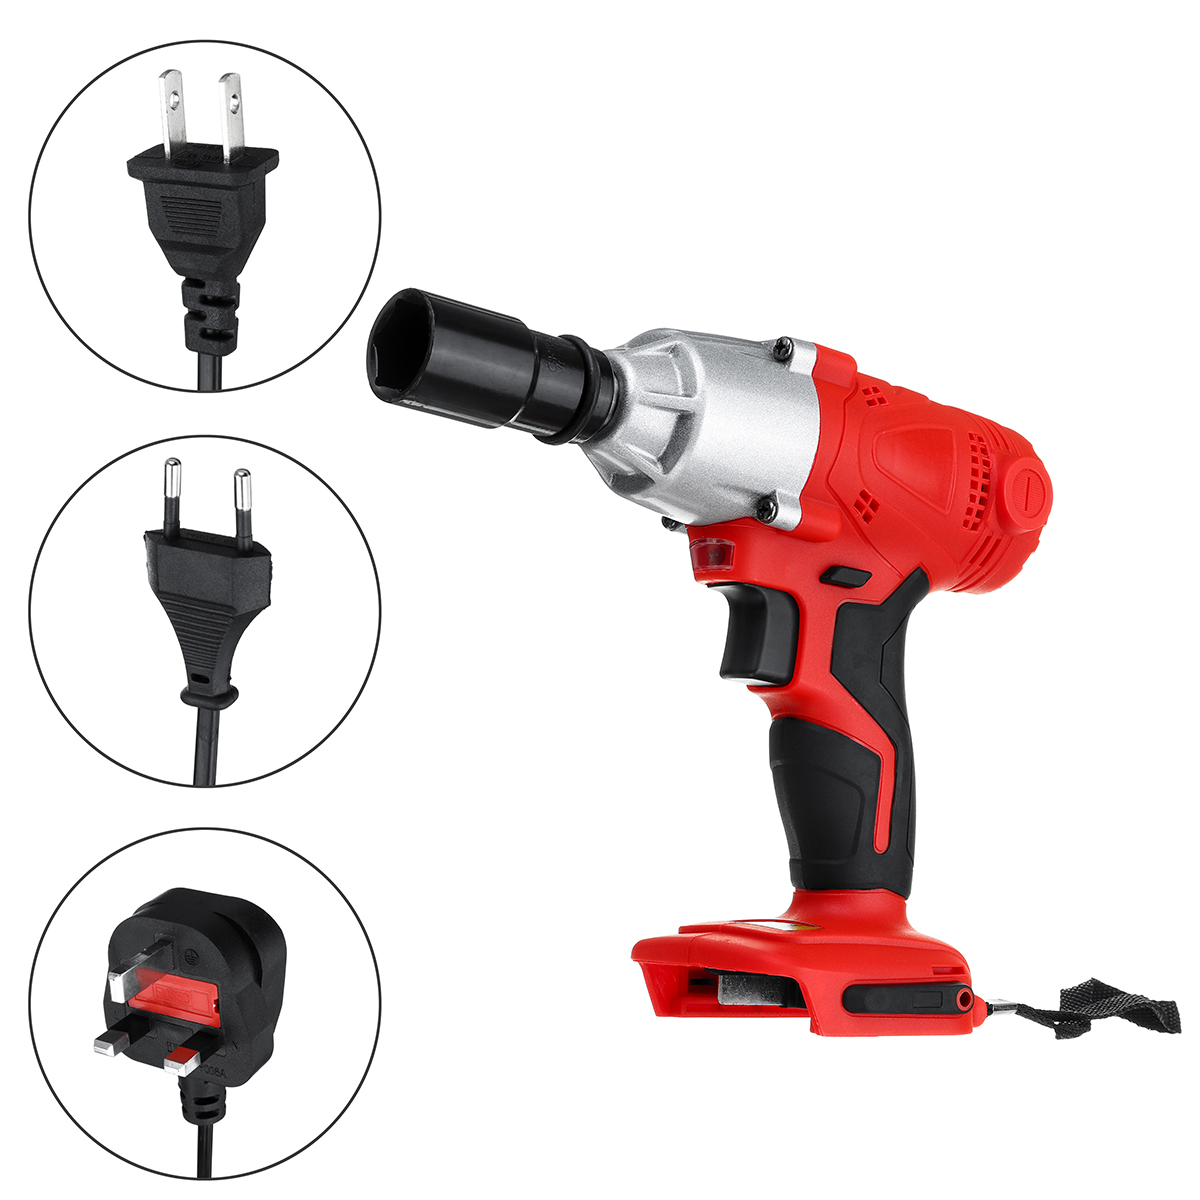 180V-240V-Cordless-LED-Light-Impact-Wrench-50Hz-350-Nm-Waterproof-Electric-Wrench-Adapted-To-18V-Mak-1590254-8